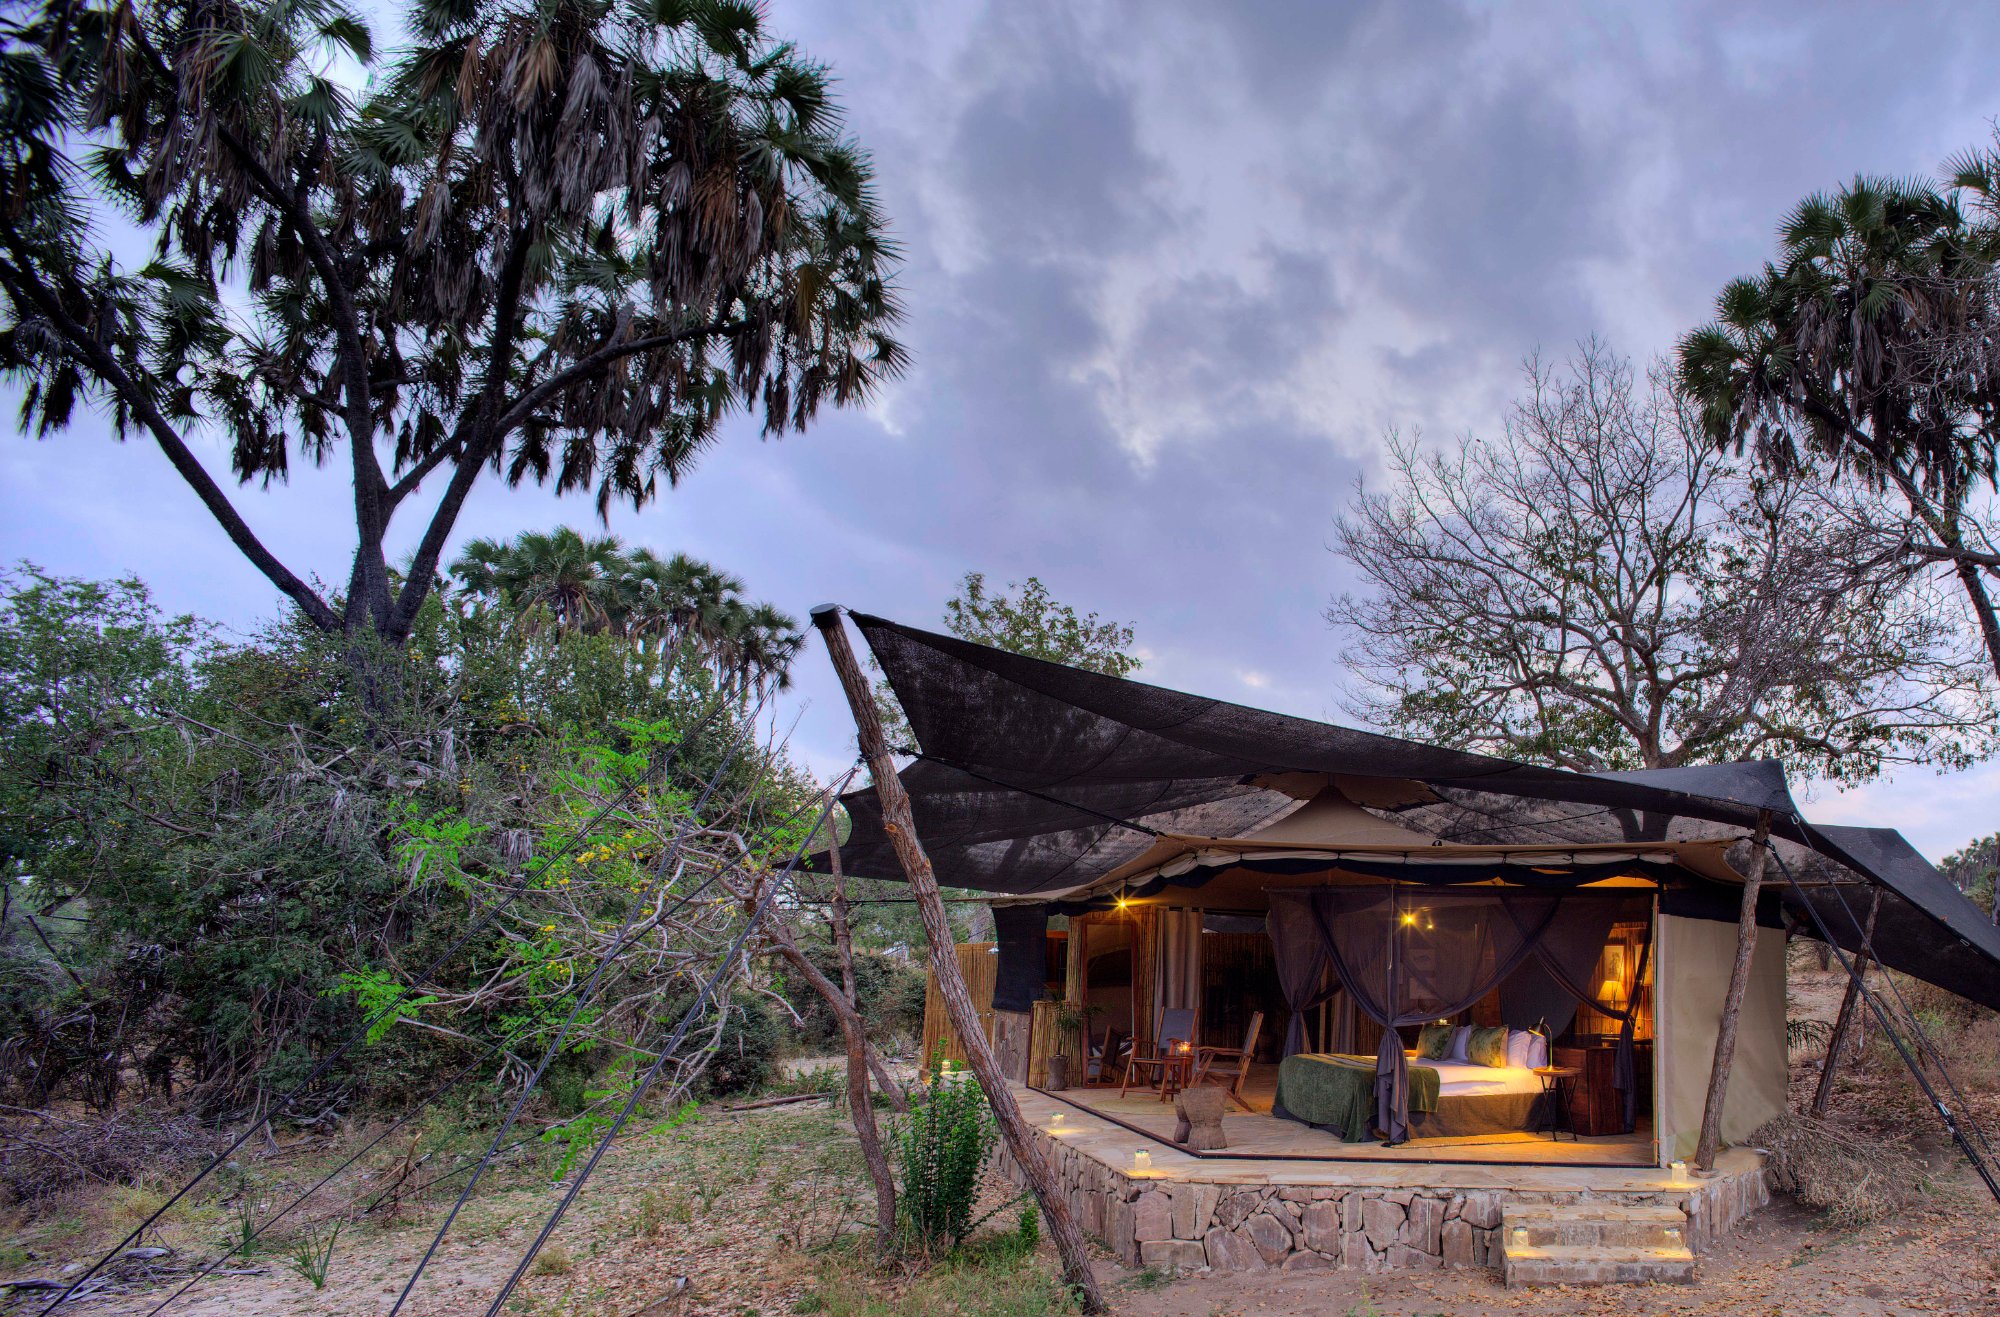 Set on a hill overlooking the water, Roho ya Selous sits in the very heart of the Selous Game Reserve.